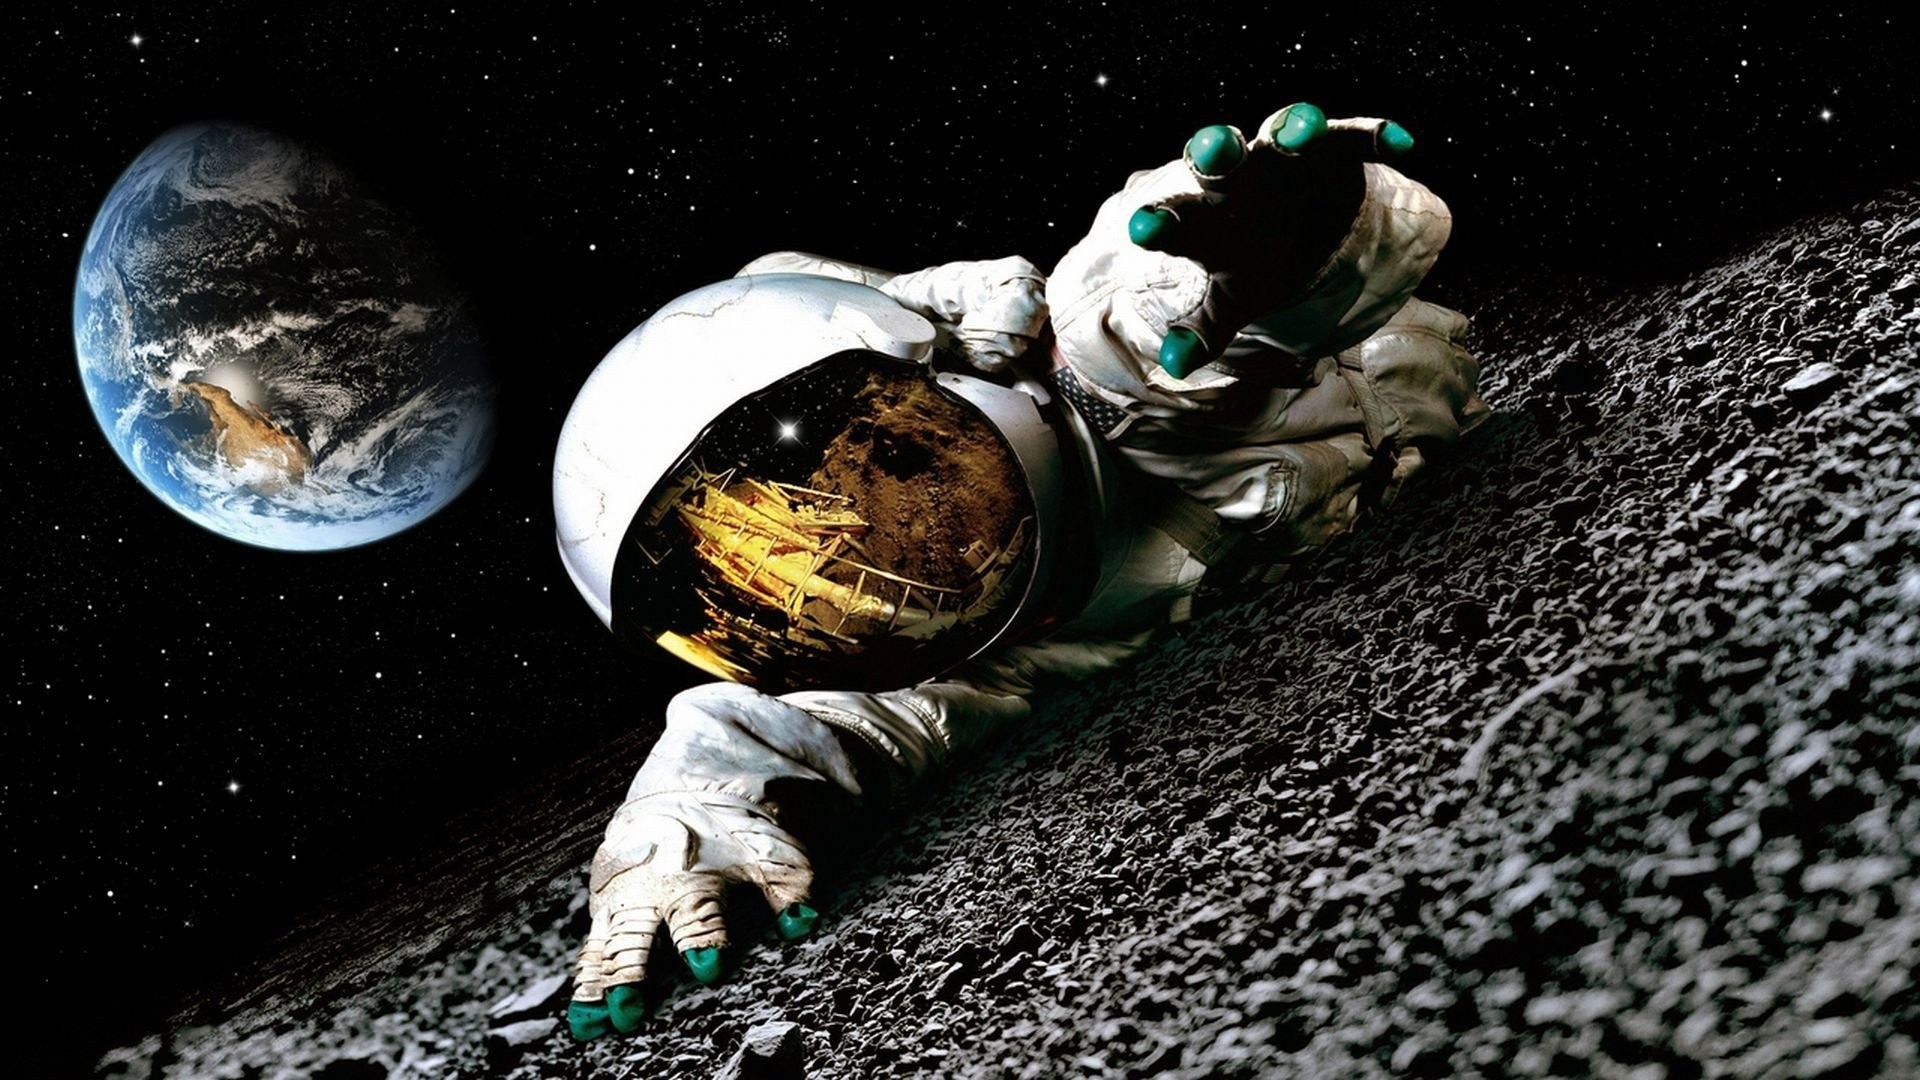 1920x1080 Outer space movies Moon Earth astronauts science fiction Apollo 18 (movie)  wallpaper |  | 296486 | WallpaperUP